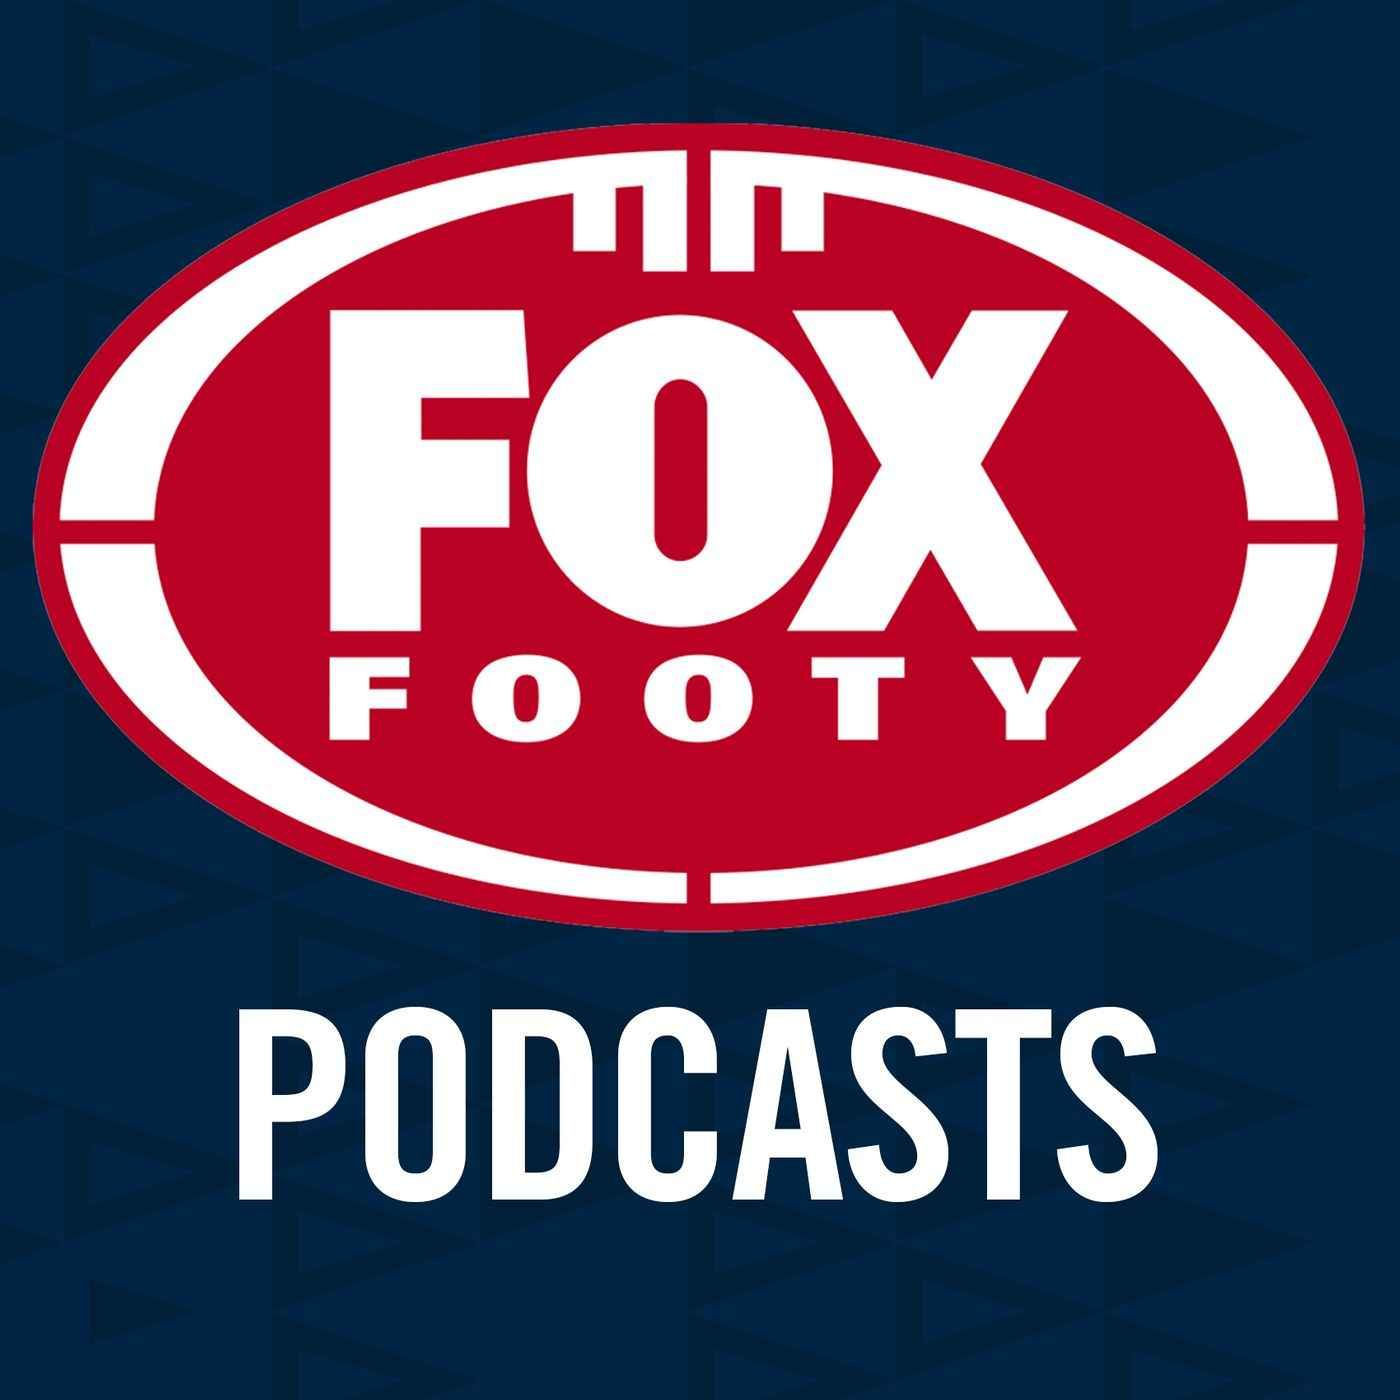 Fox Footy Live: Welcome to the new daily show!